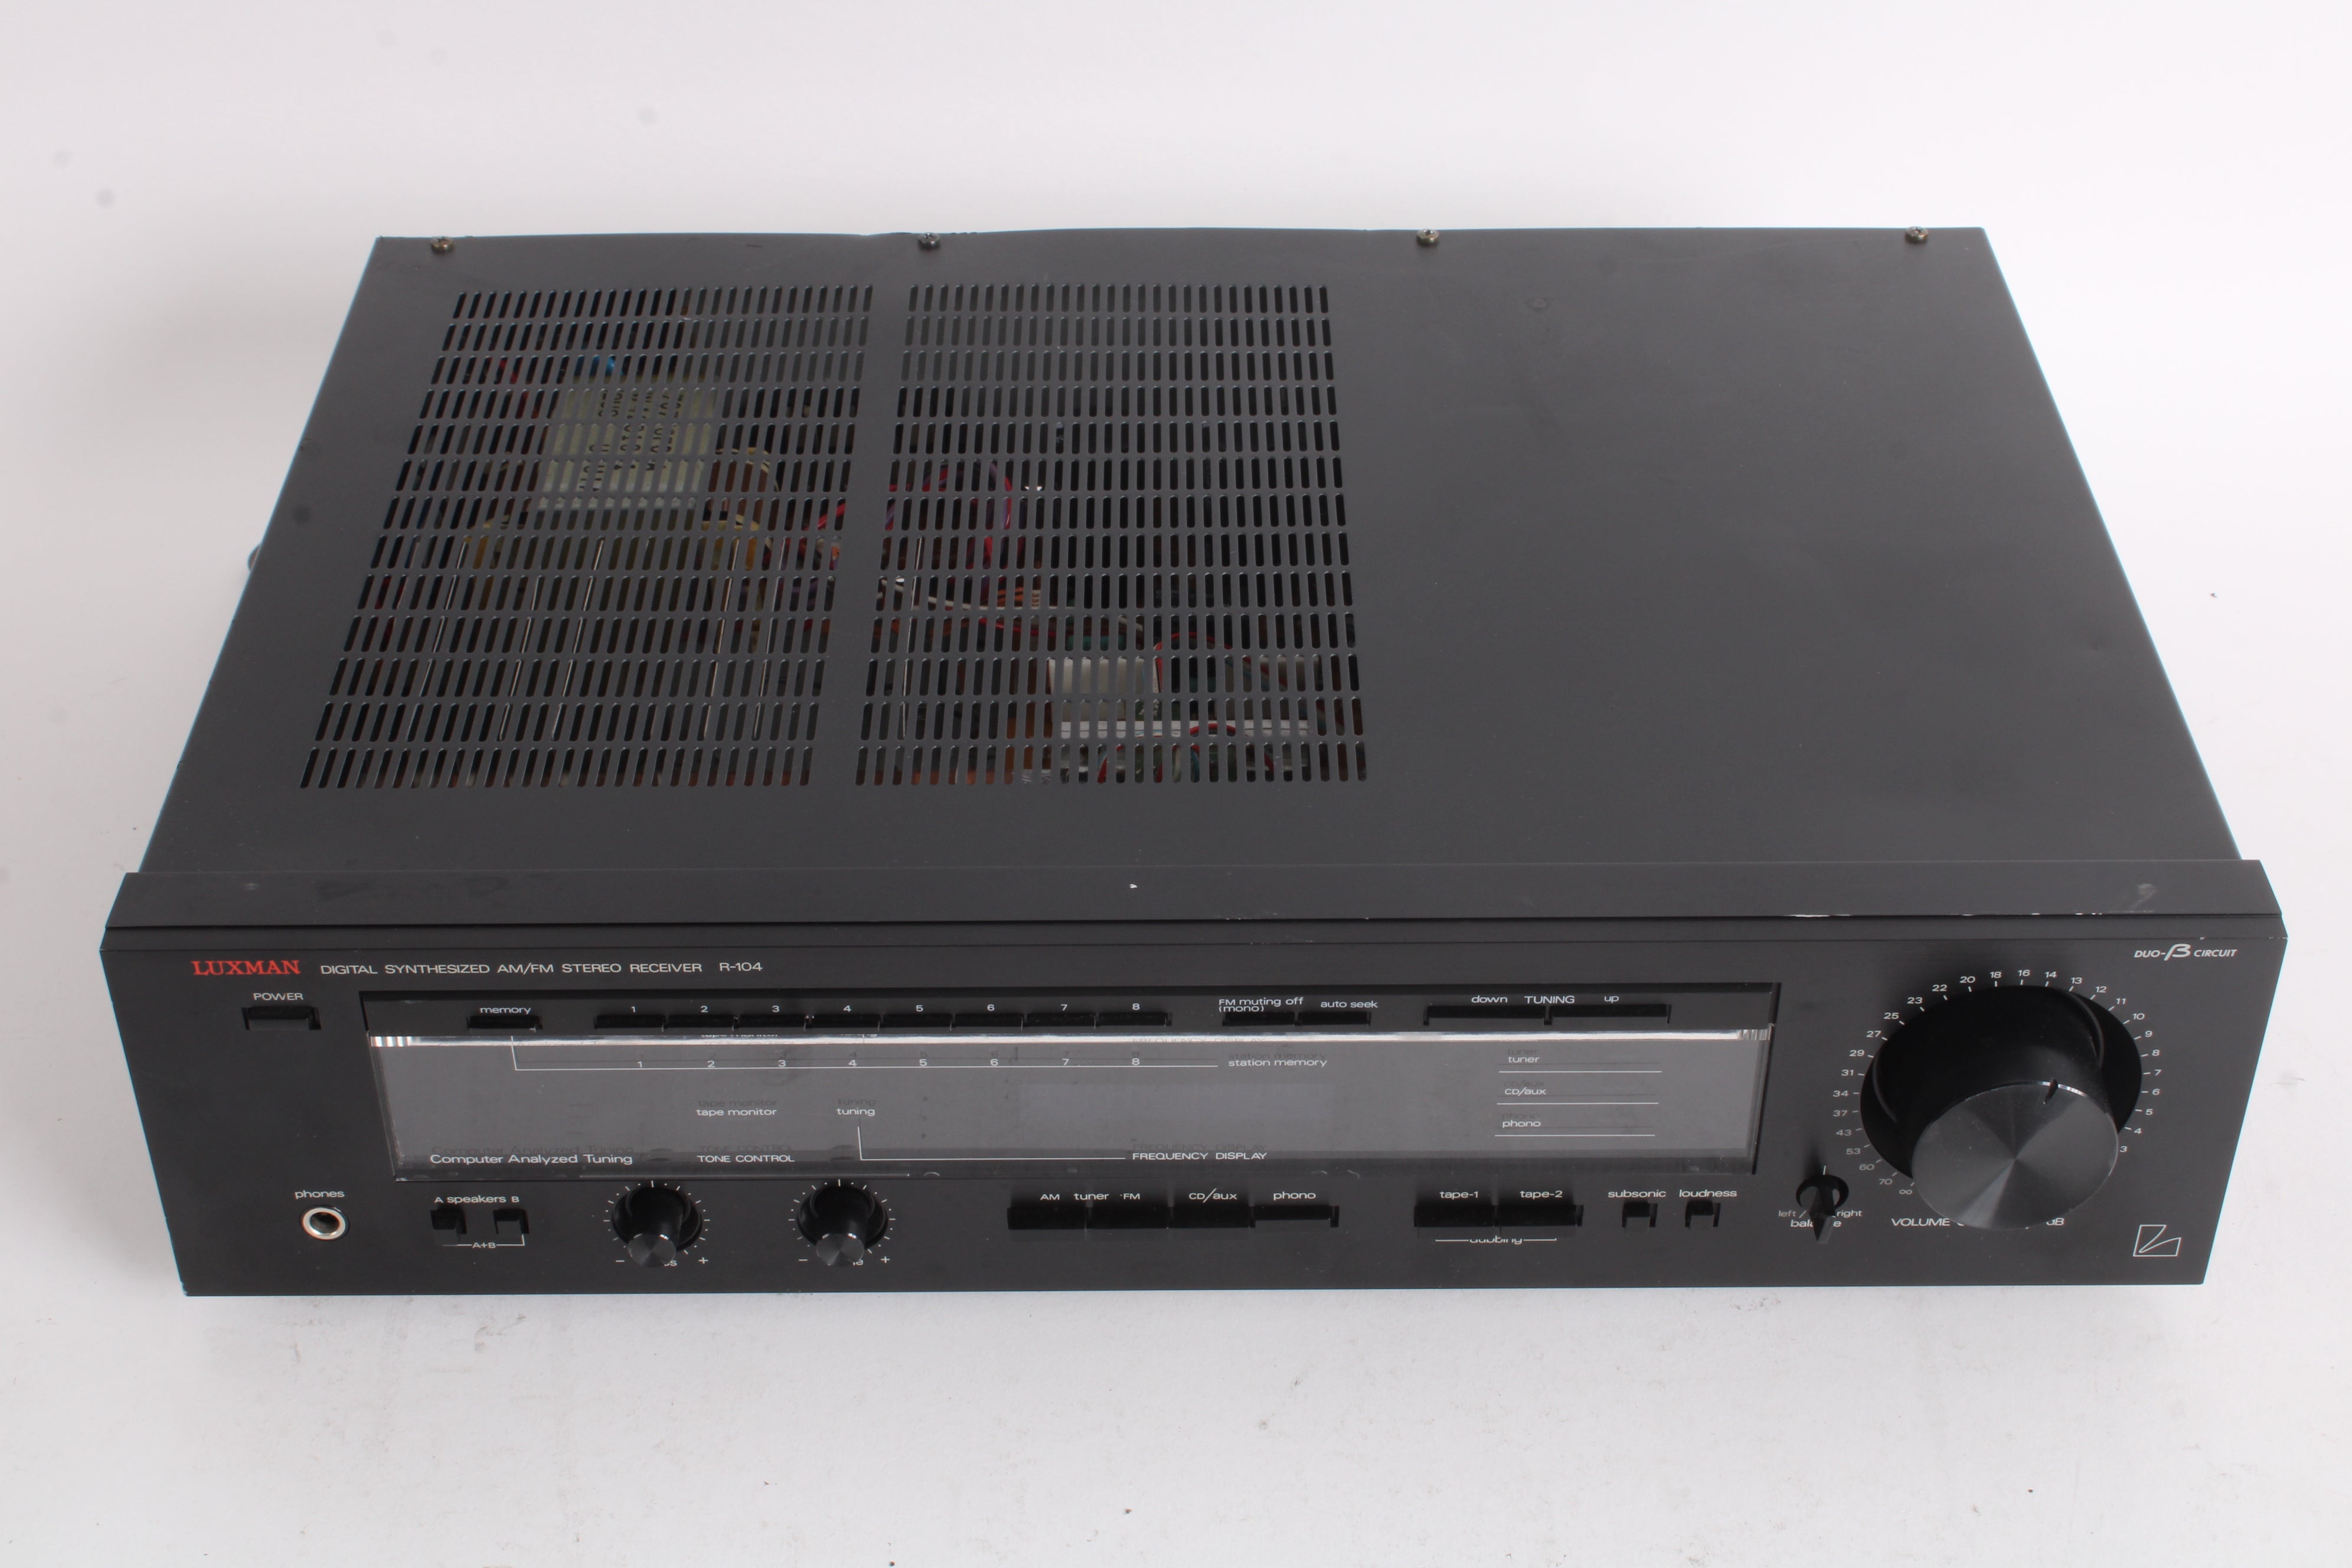 Luxman R-104 Digital Synthesized AM/FM Stereo Receiver - AS IS